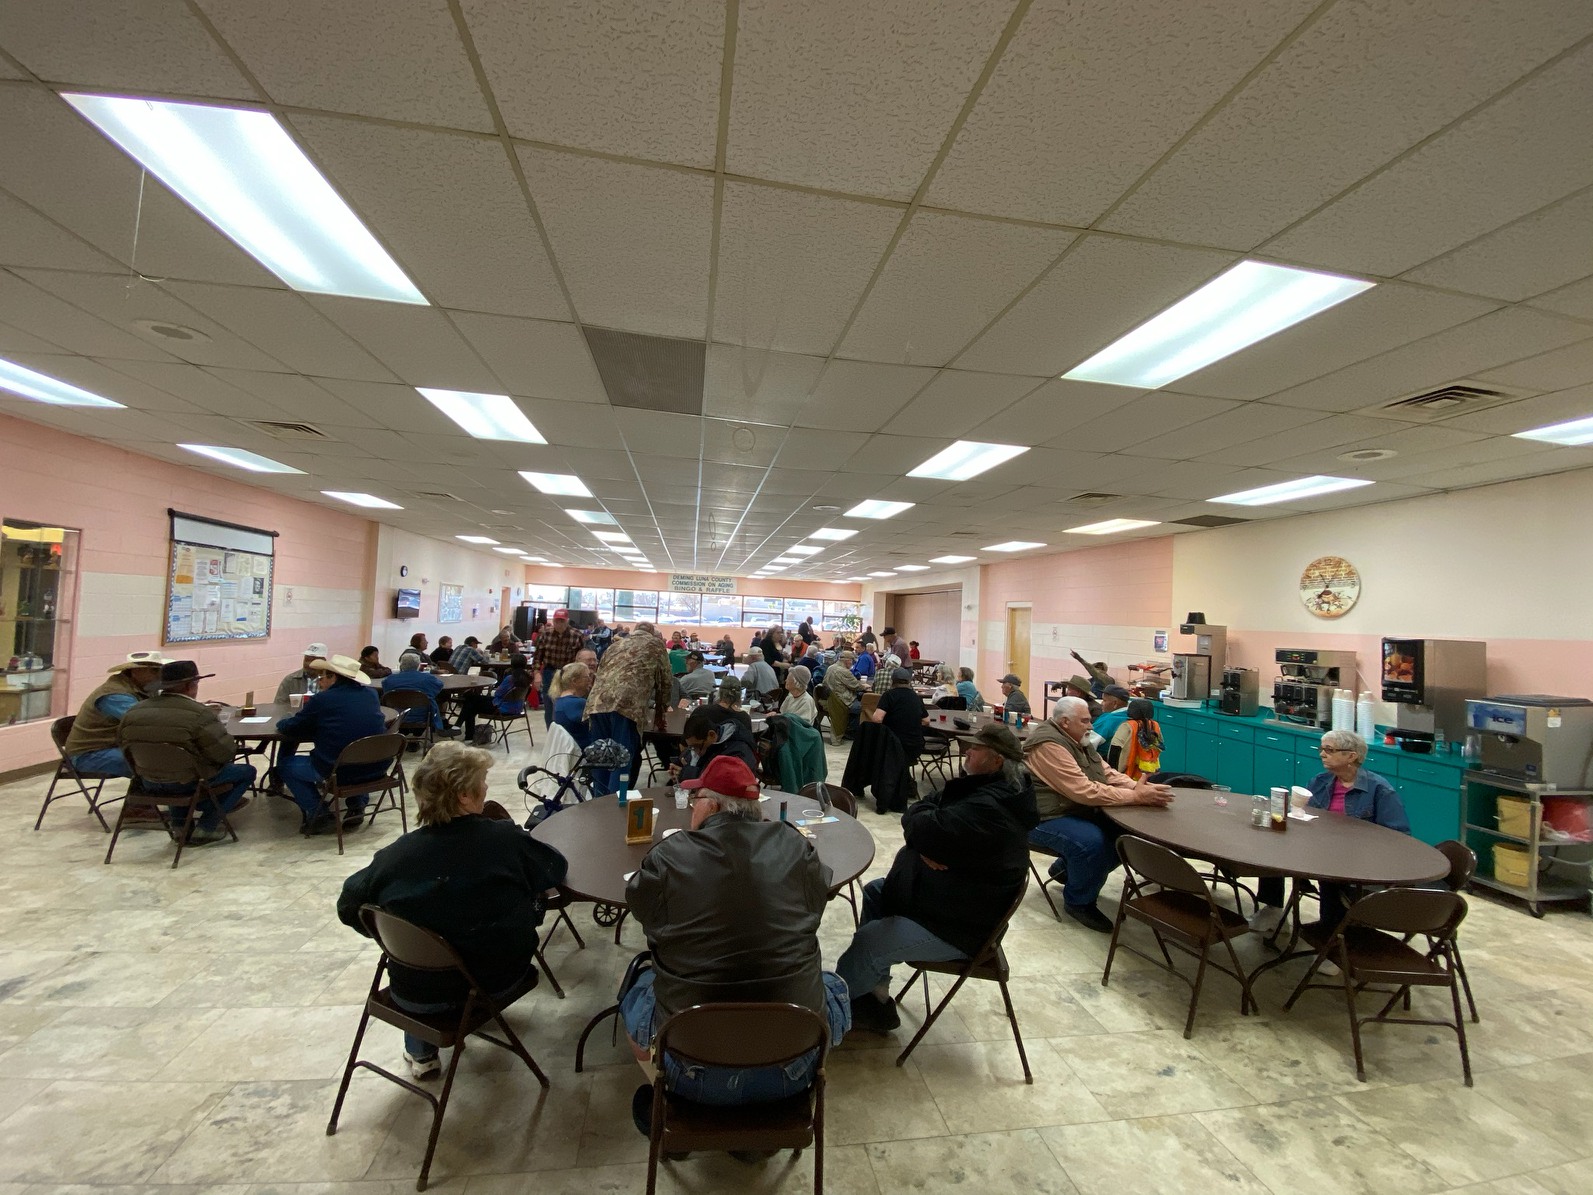 A full house awaits the start of the FCC's consumer presentation Thursday at the Deming-Luna County Senior Citizens Center, in Deming, NM.